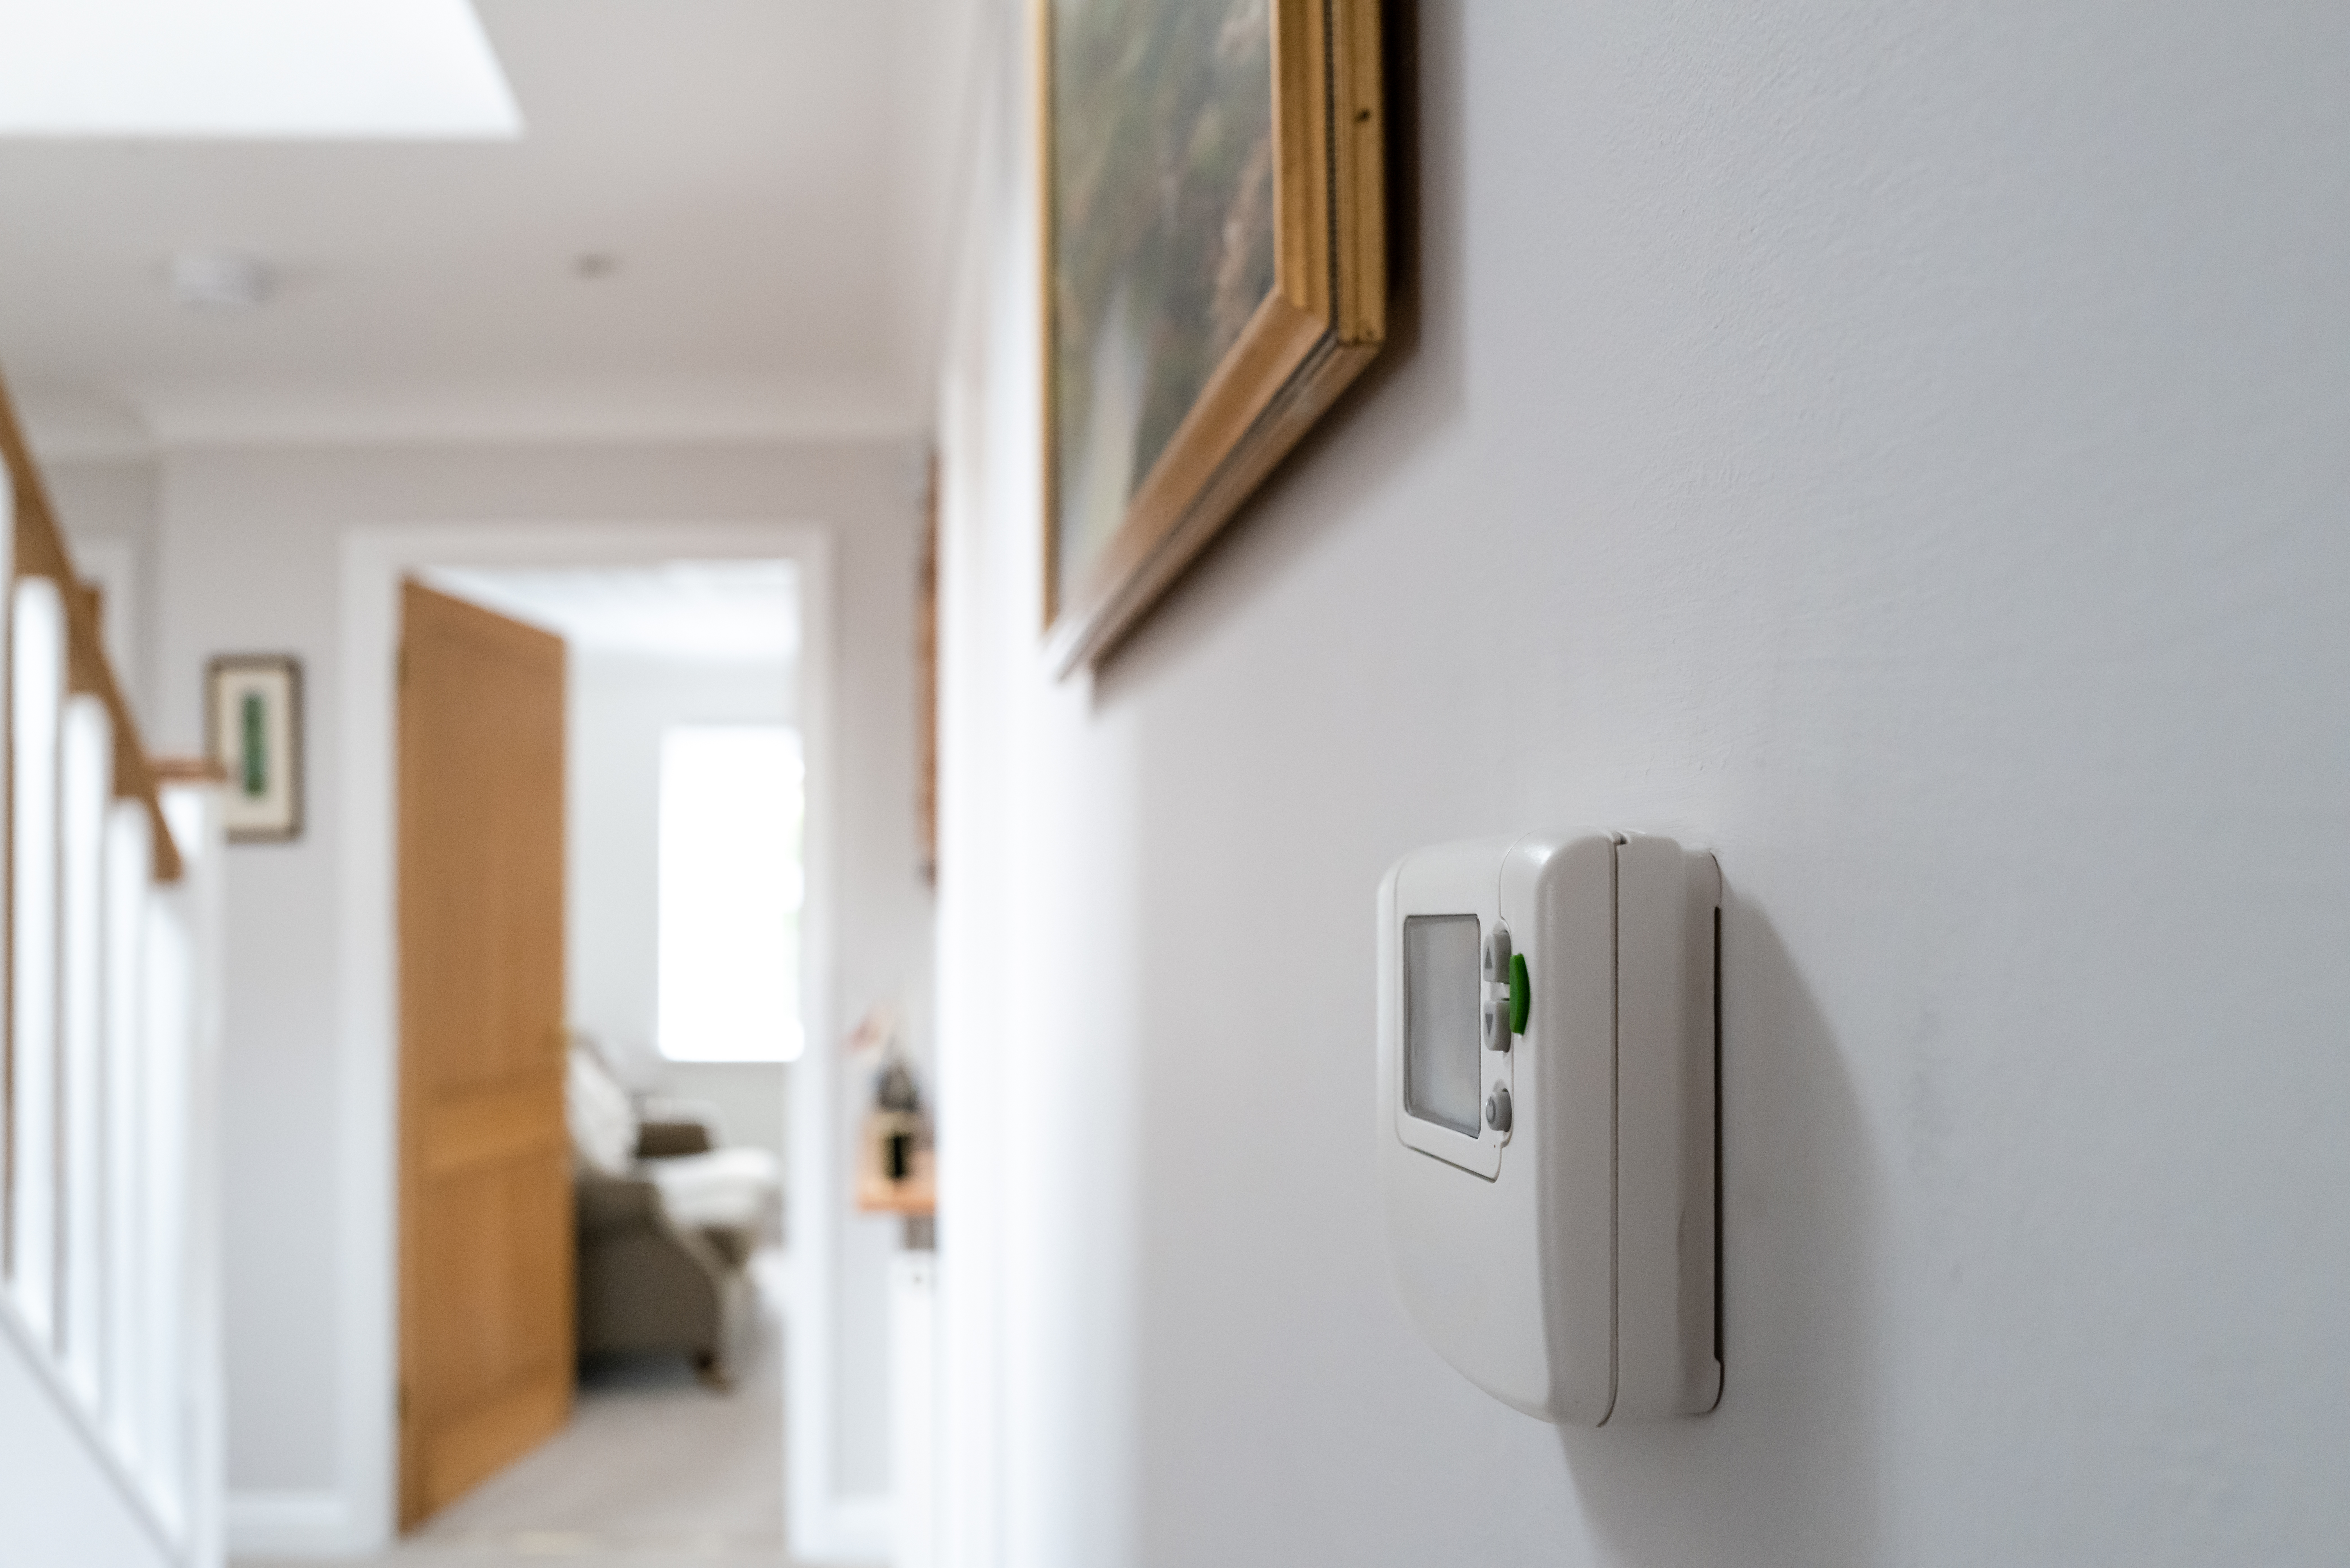 How to Optimize Smart Thermostats for Winter Energy Savings